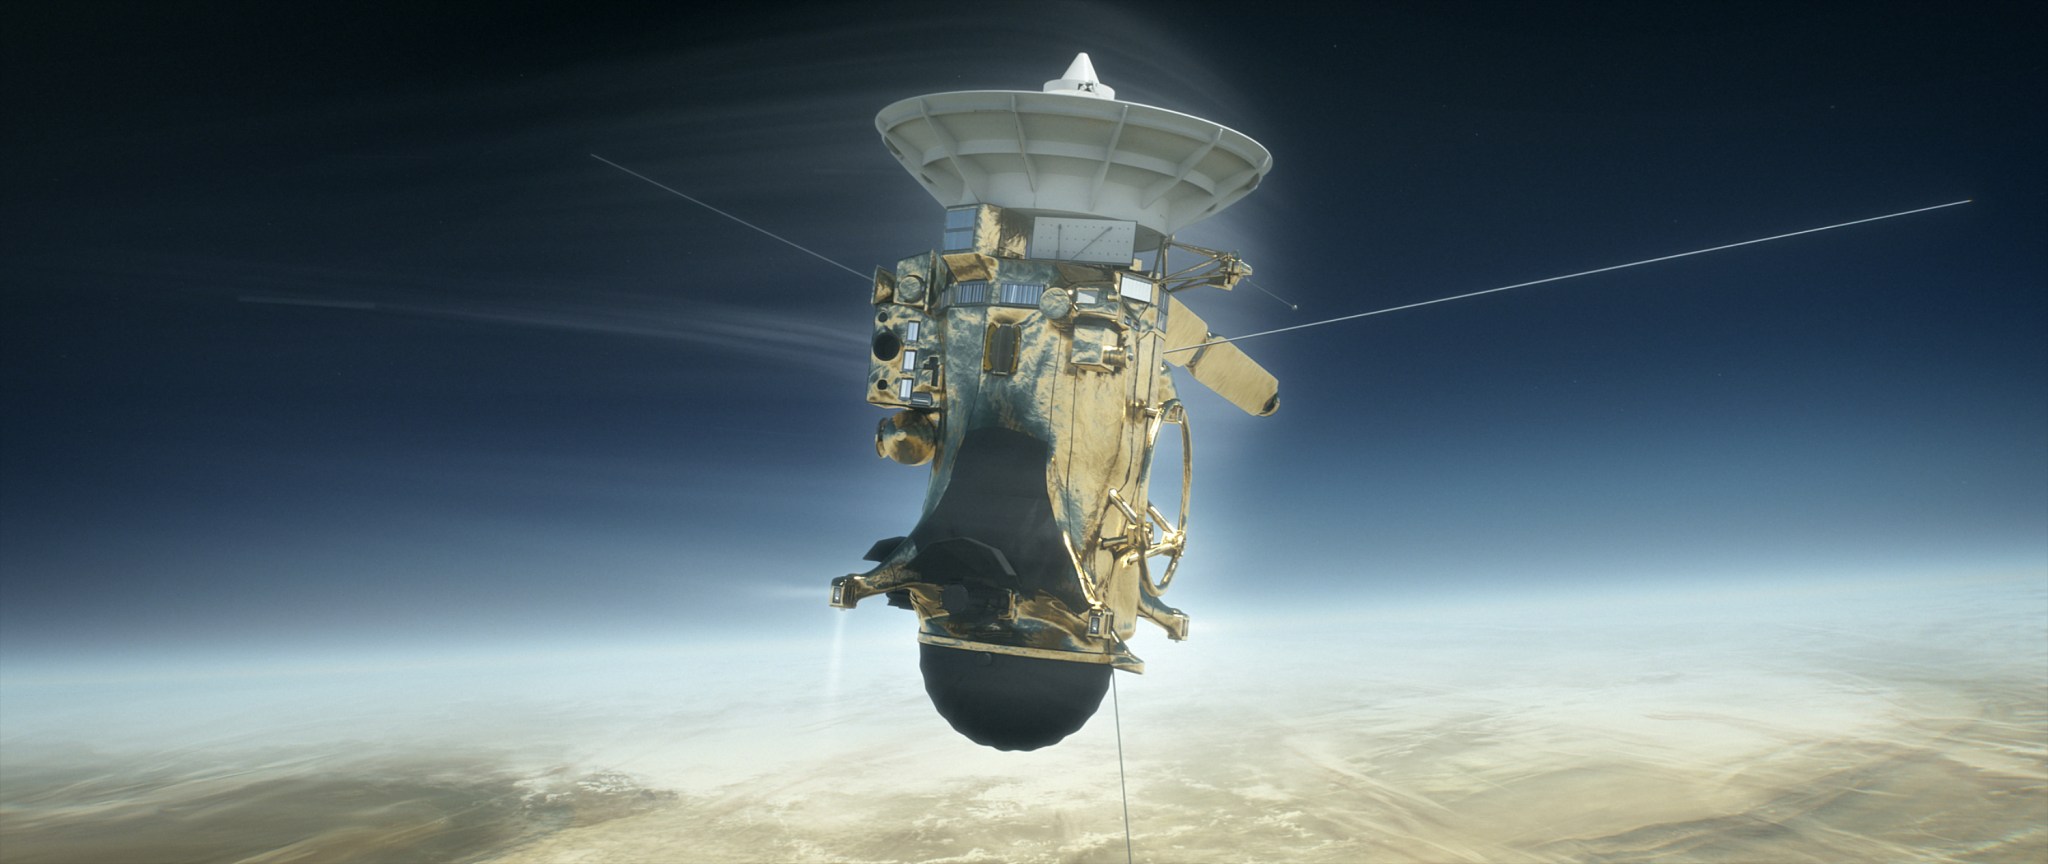 Illustration of NASA’s Cassini spacecraft during its final plunge into Saturn’s atmosphere on Sept. 15, 2017.